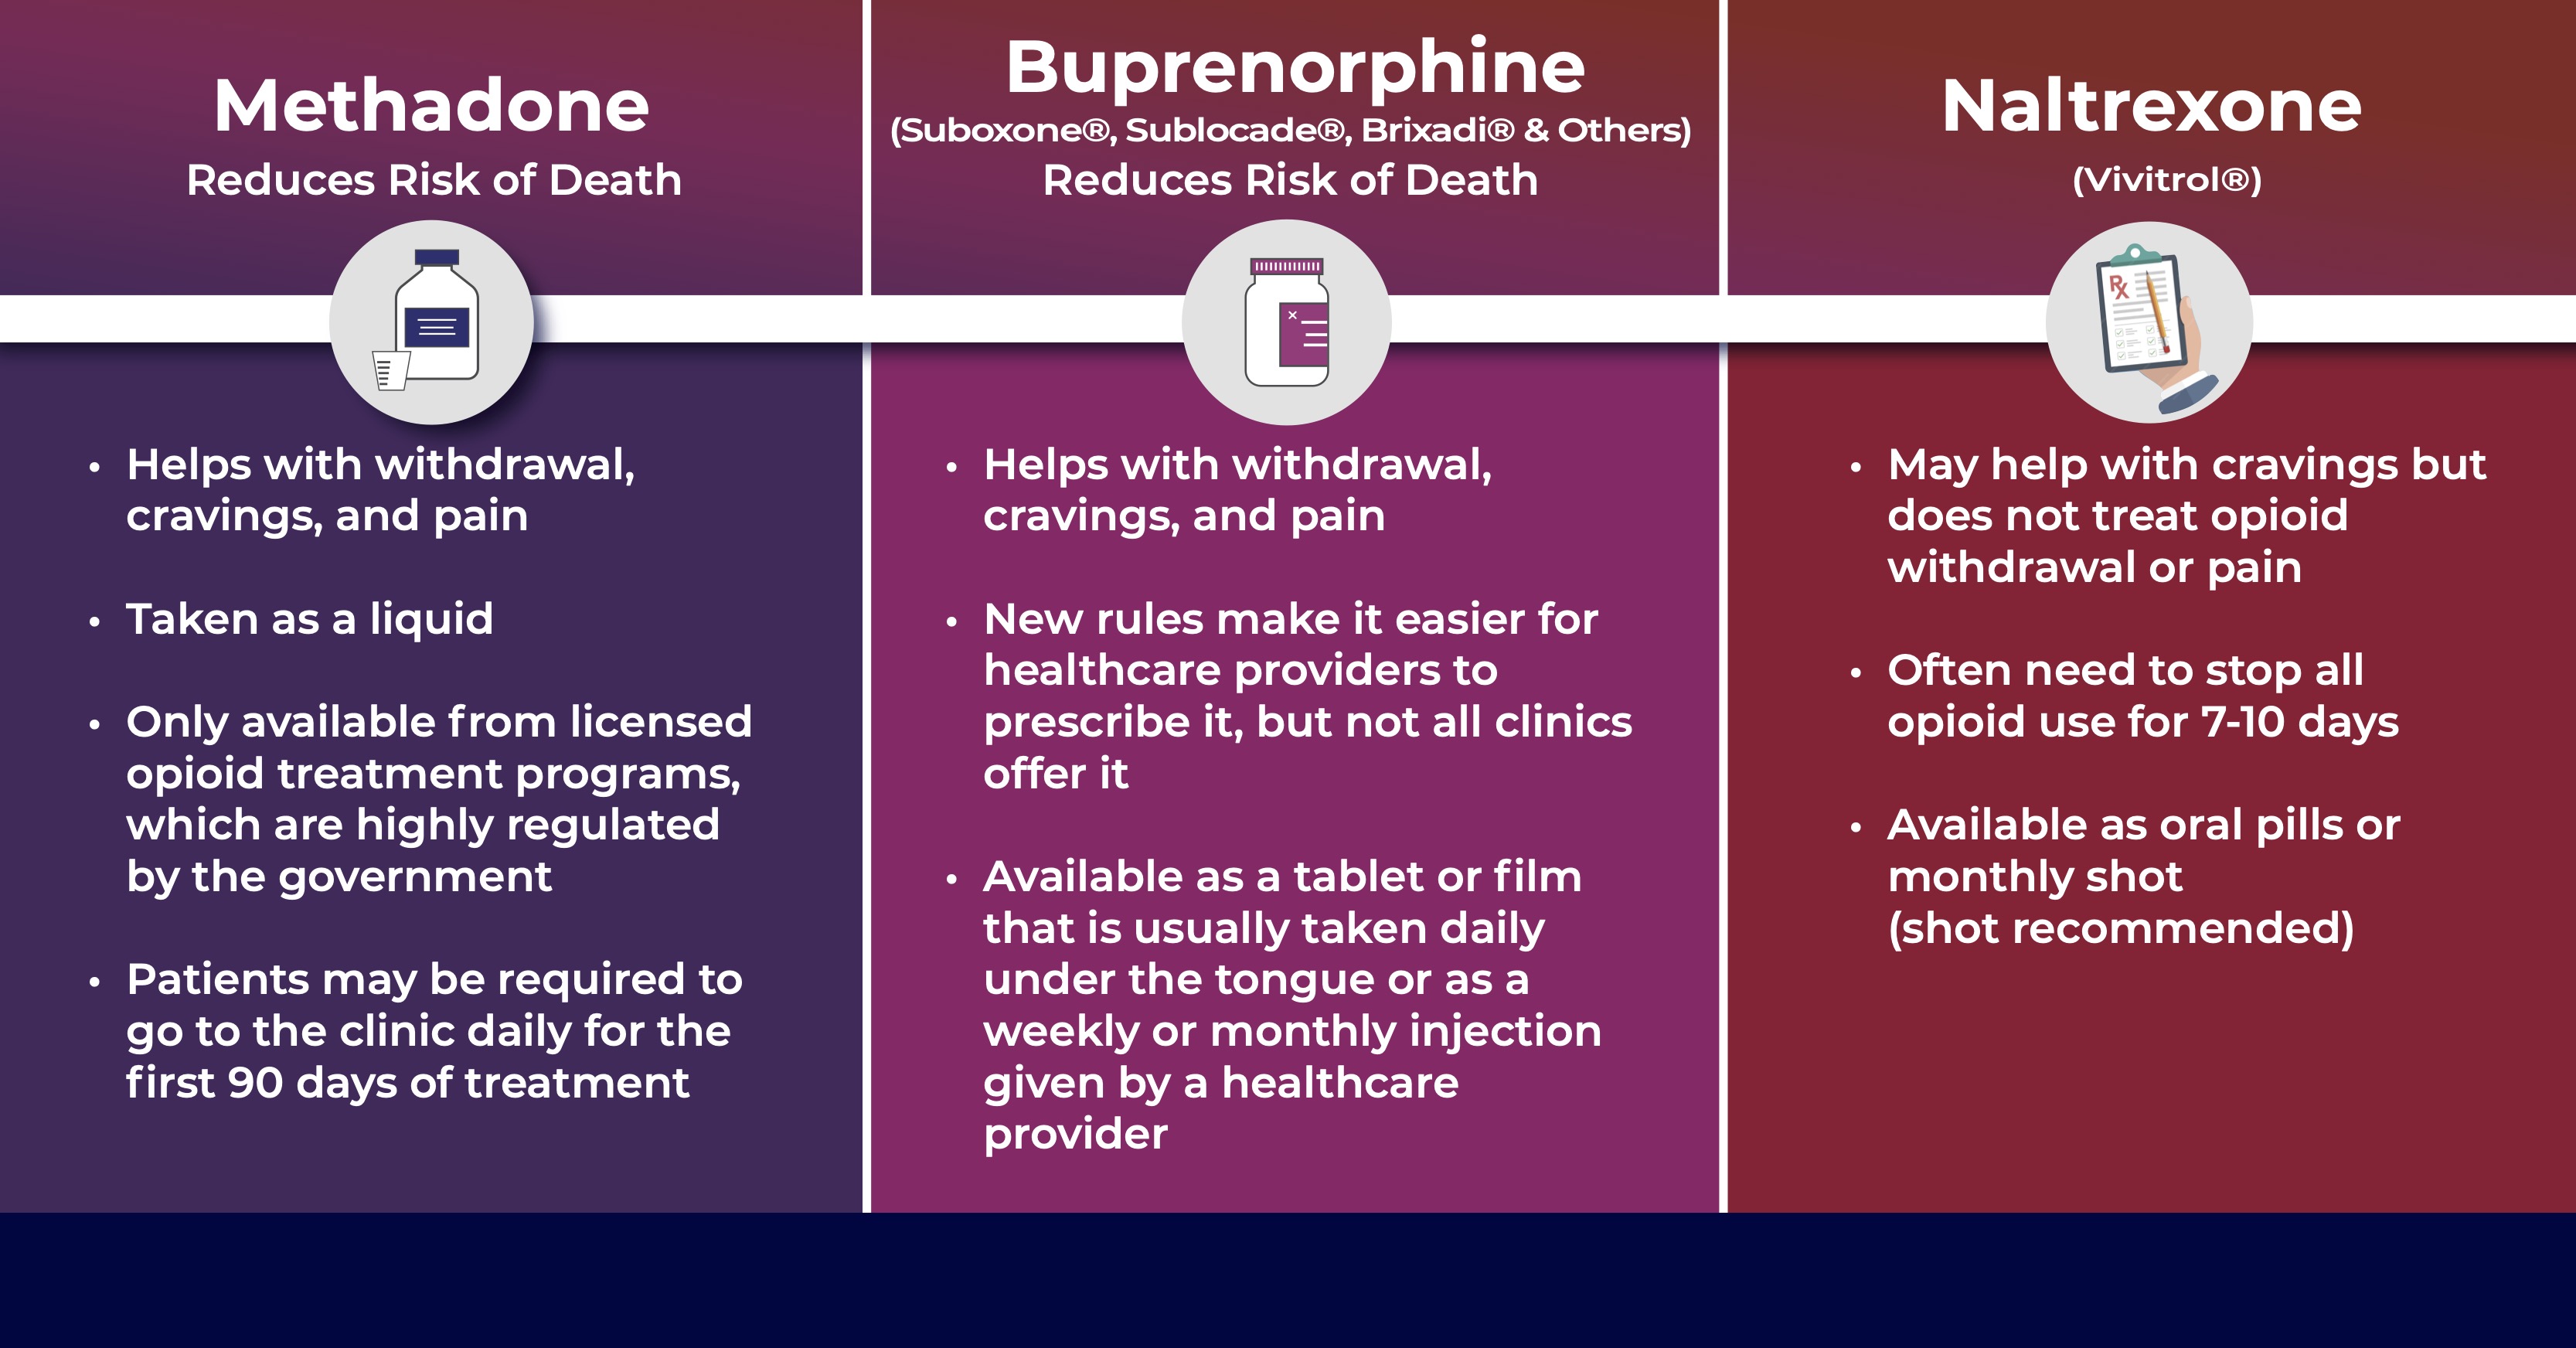 Information about methadone, buprenorphine, and naltrexone